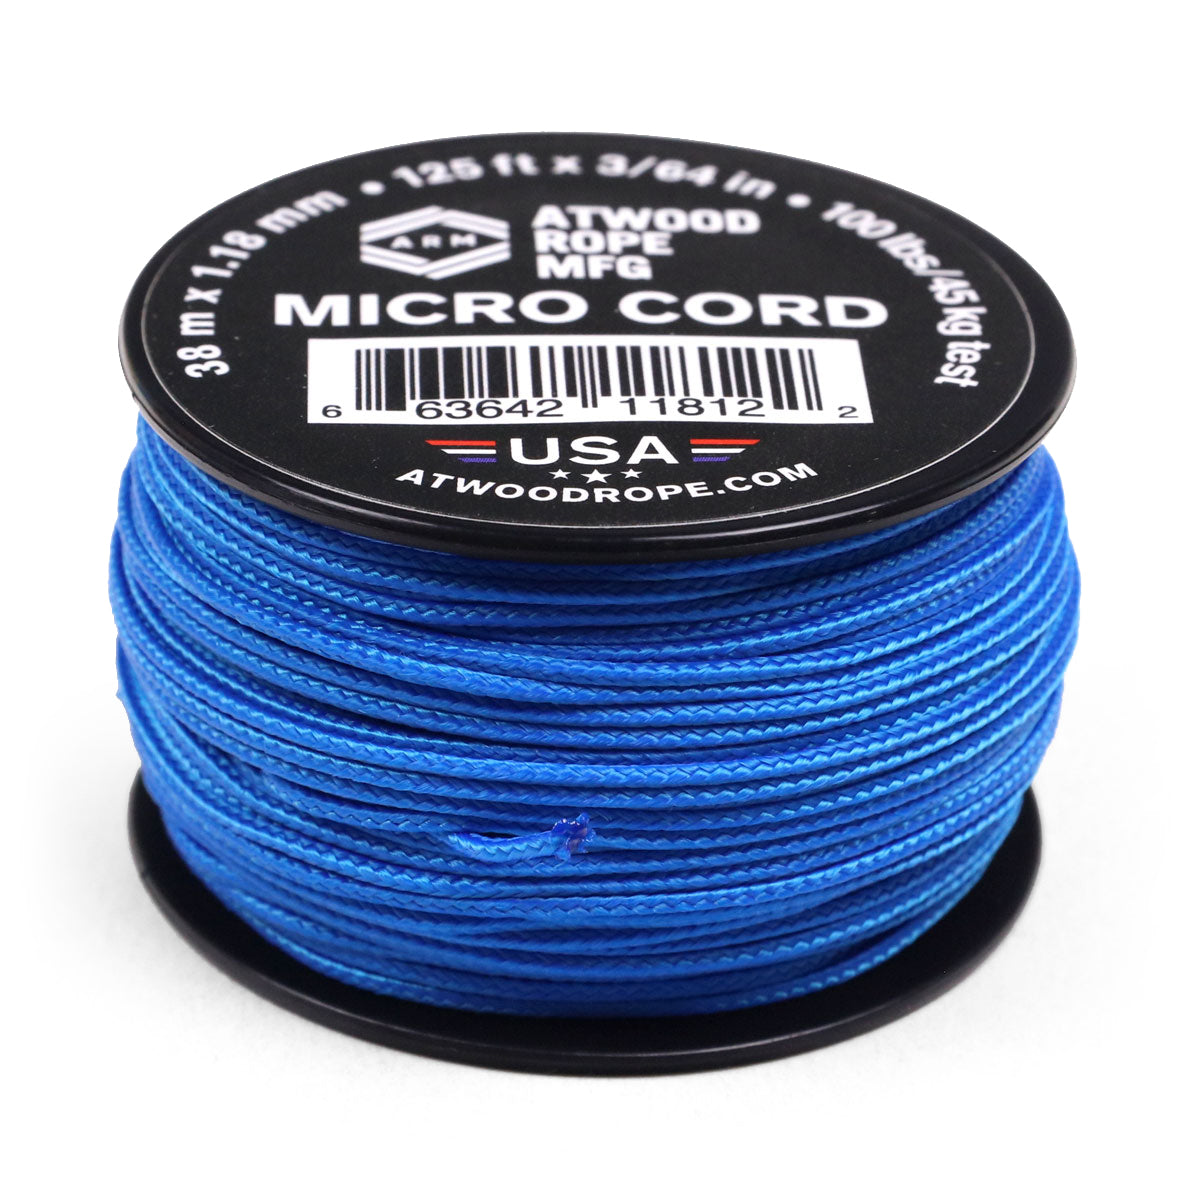 1.18mm Micro Cord - Blue – Atwood Rope MFG